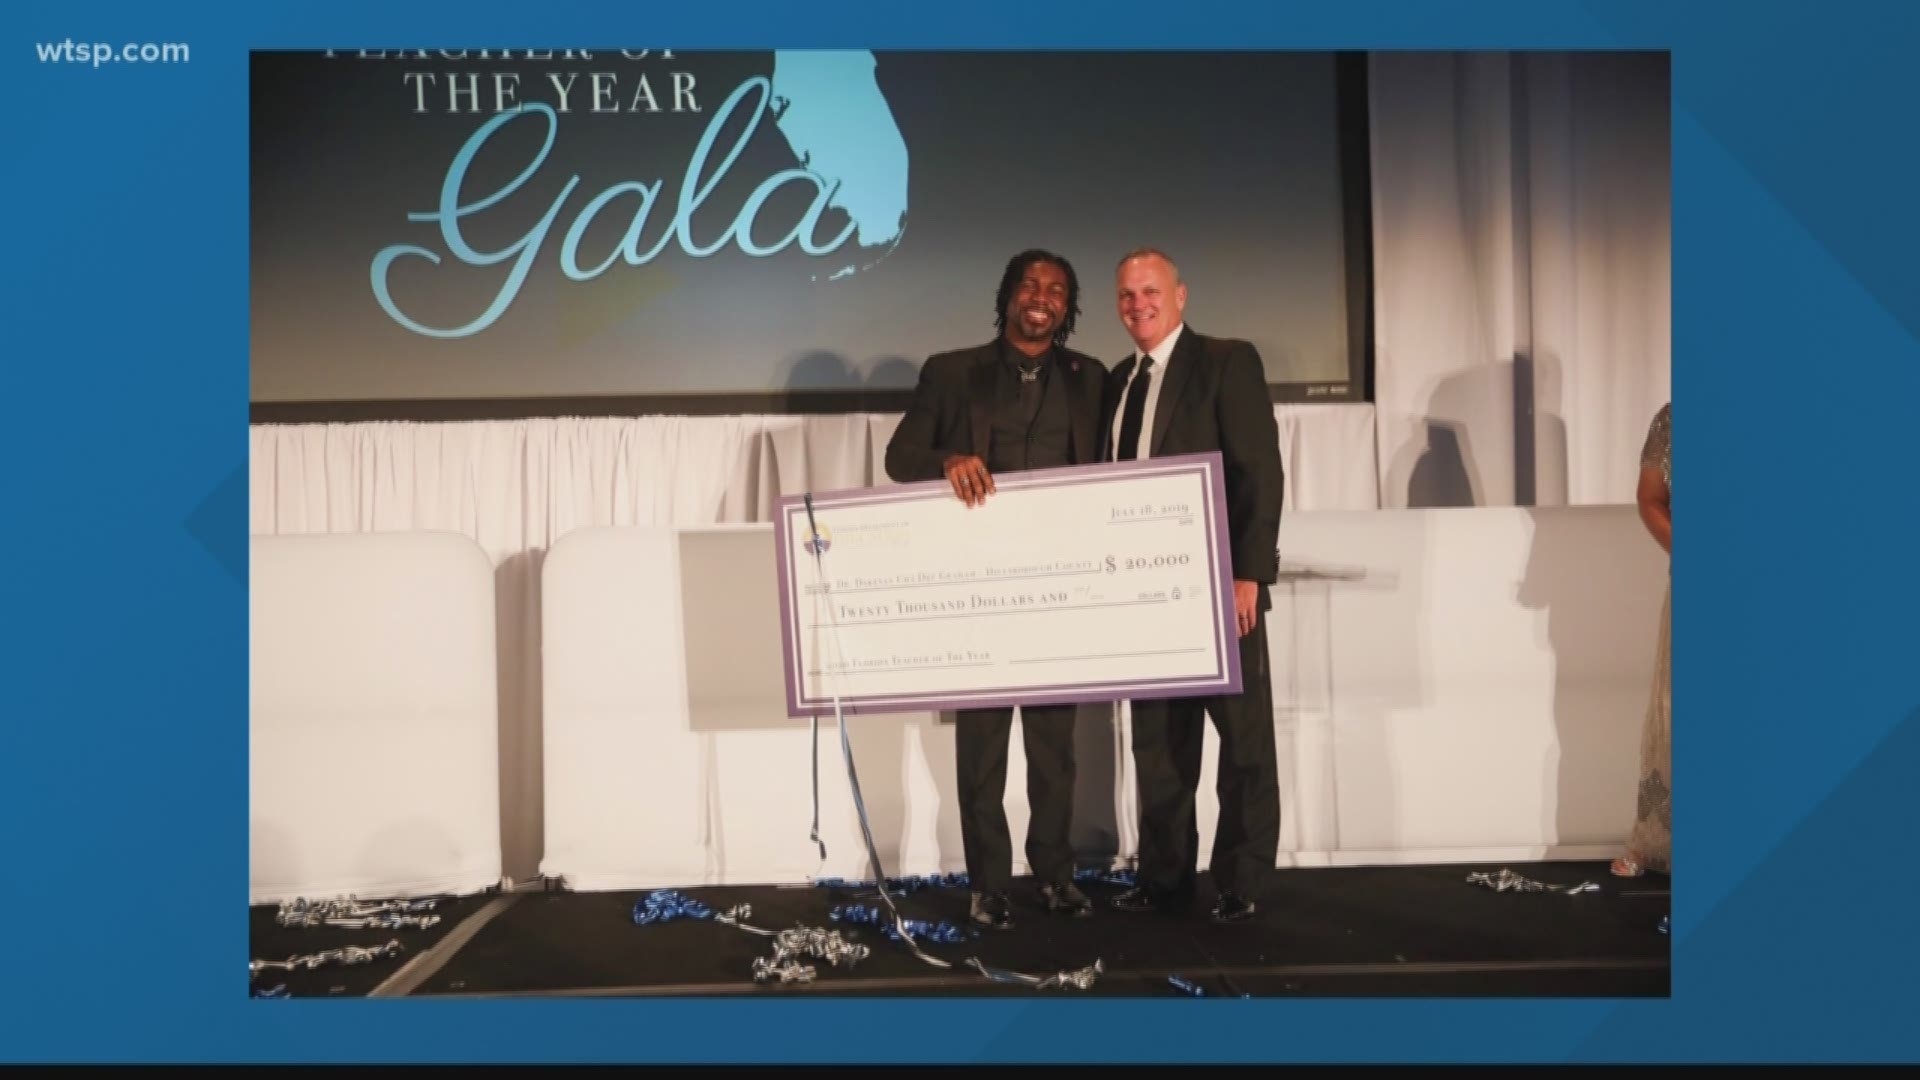 A Hillsborough County music teacher was named the 2020 Florida Teacher of the Year on Thursday.

Dr. Dakeyan "Dr. Dre" Graham of C. Leon King High School received the honor at the Teacher of the Year Gala from Gov. Ron DeSantis and Education Commissioner Richard Concordan.